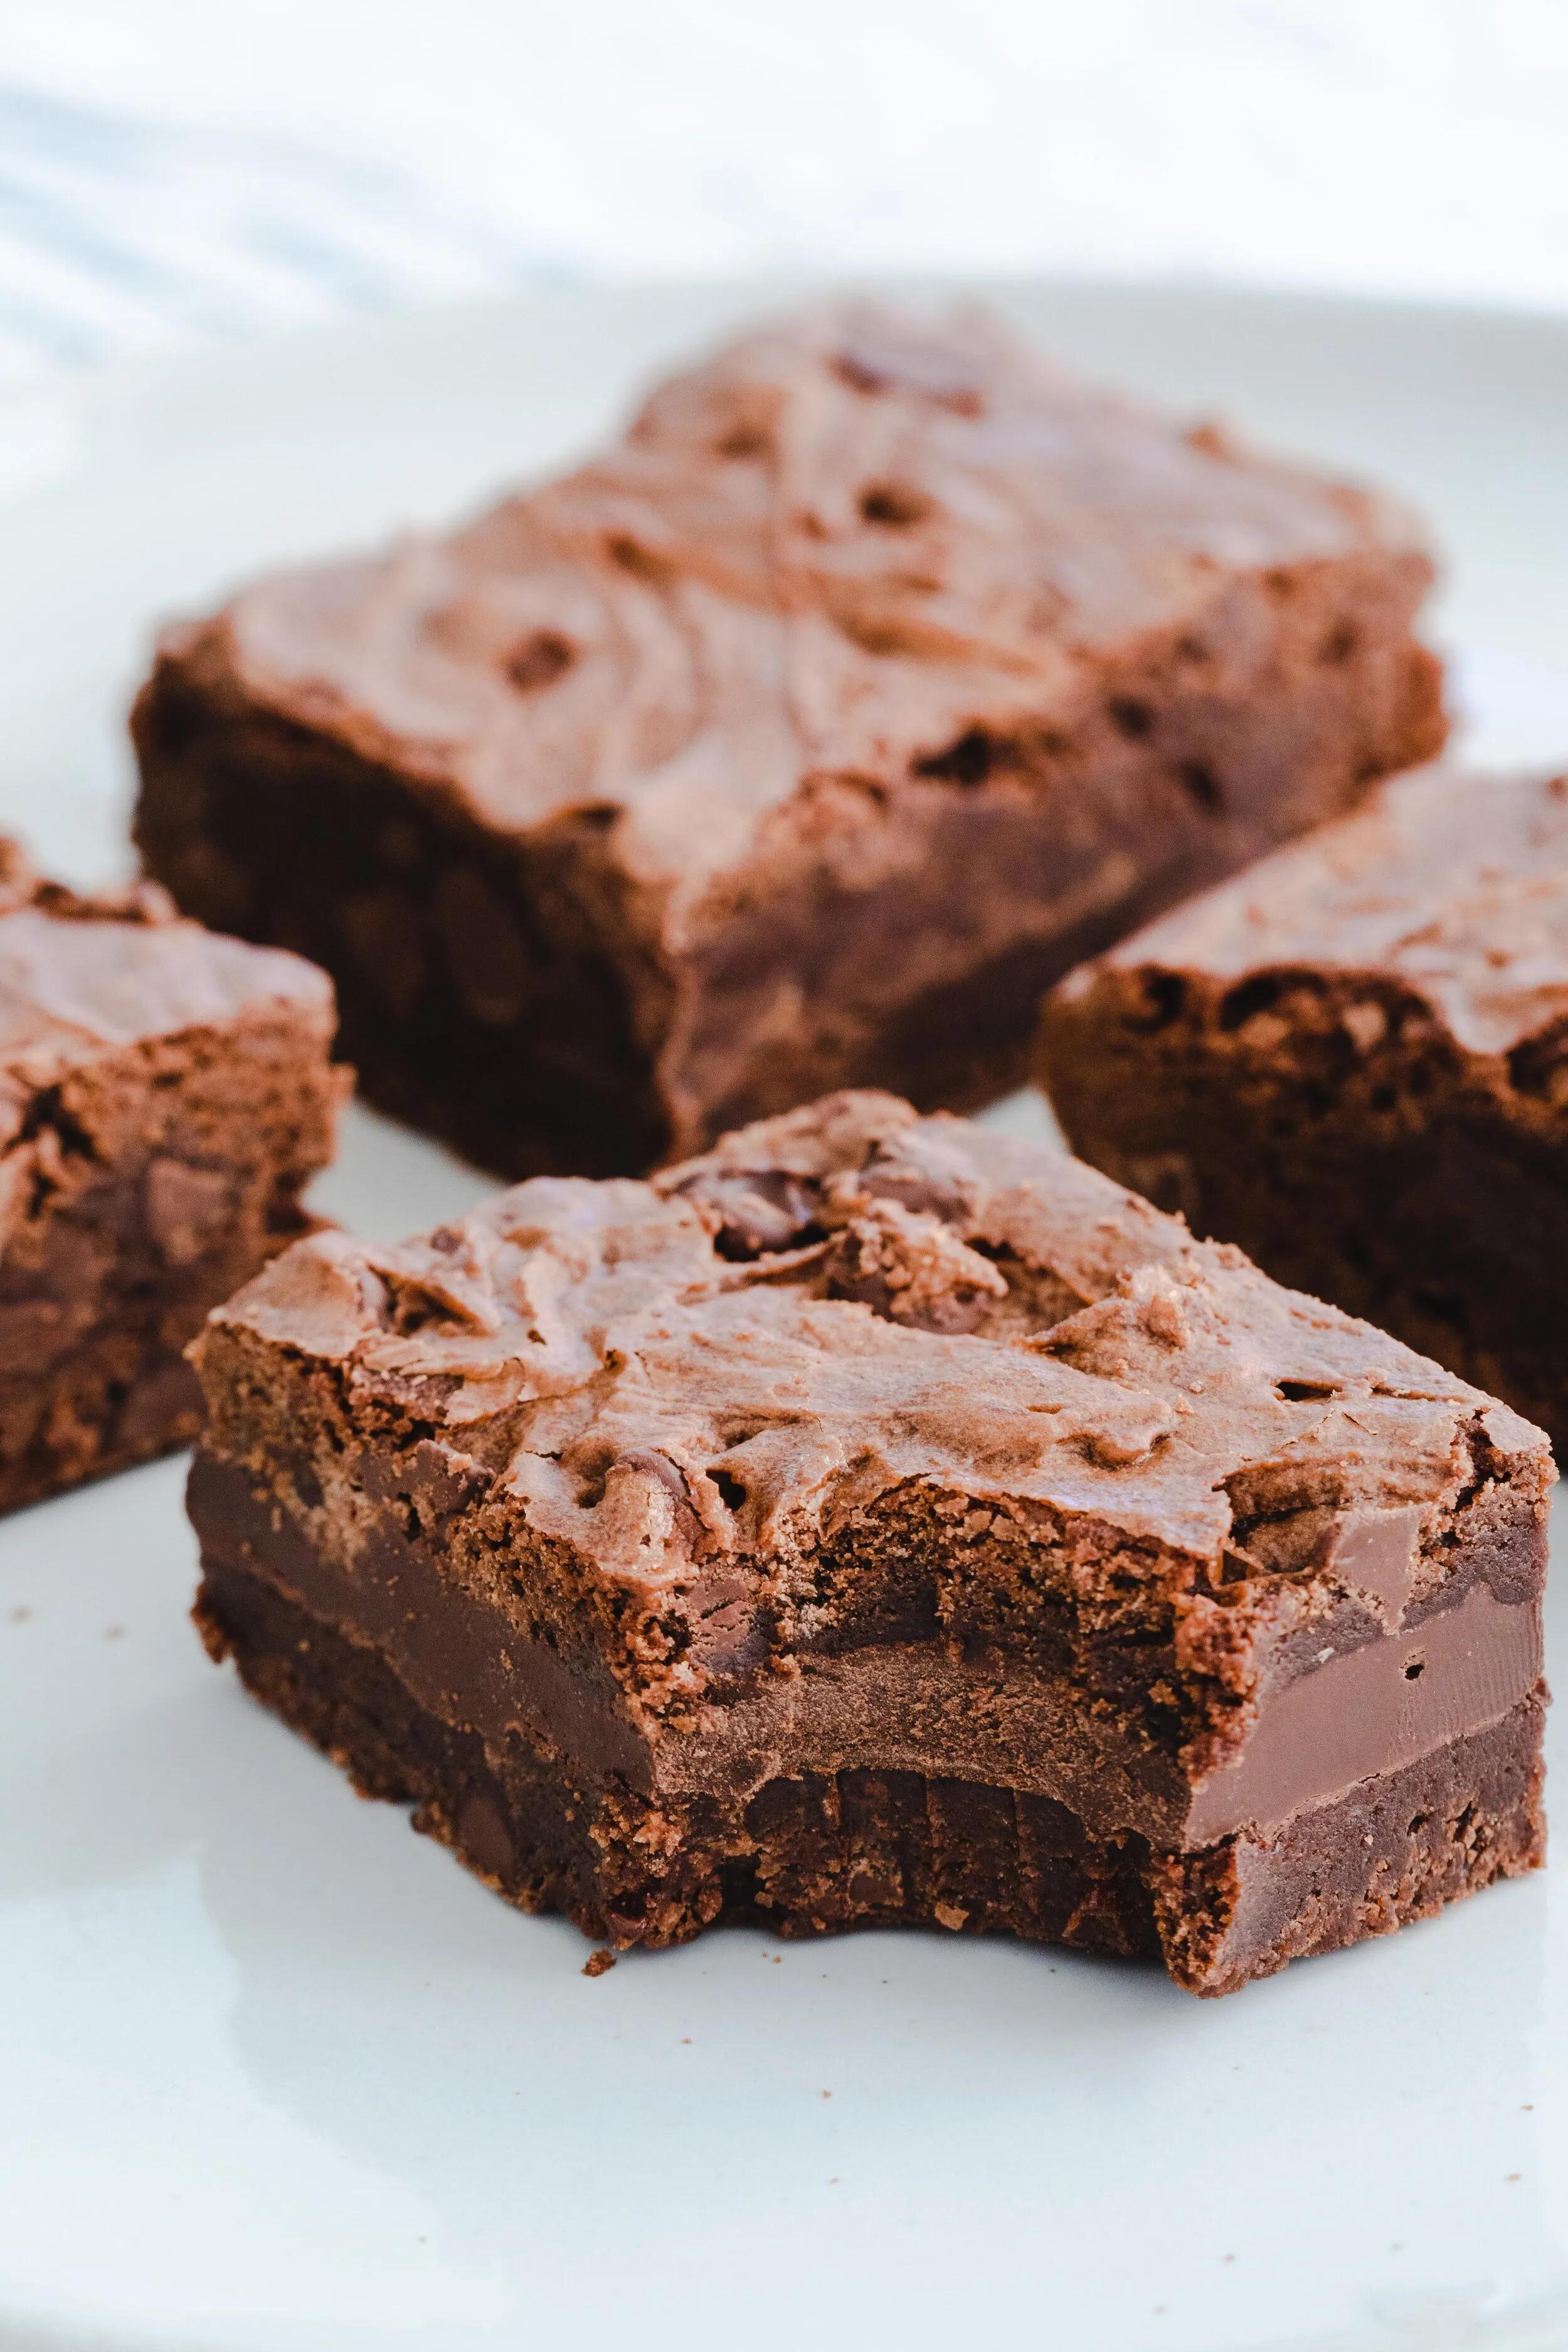 All Time top 15 Best Chocolate Brownies – Easy Recipes To Make at Home